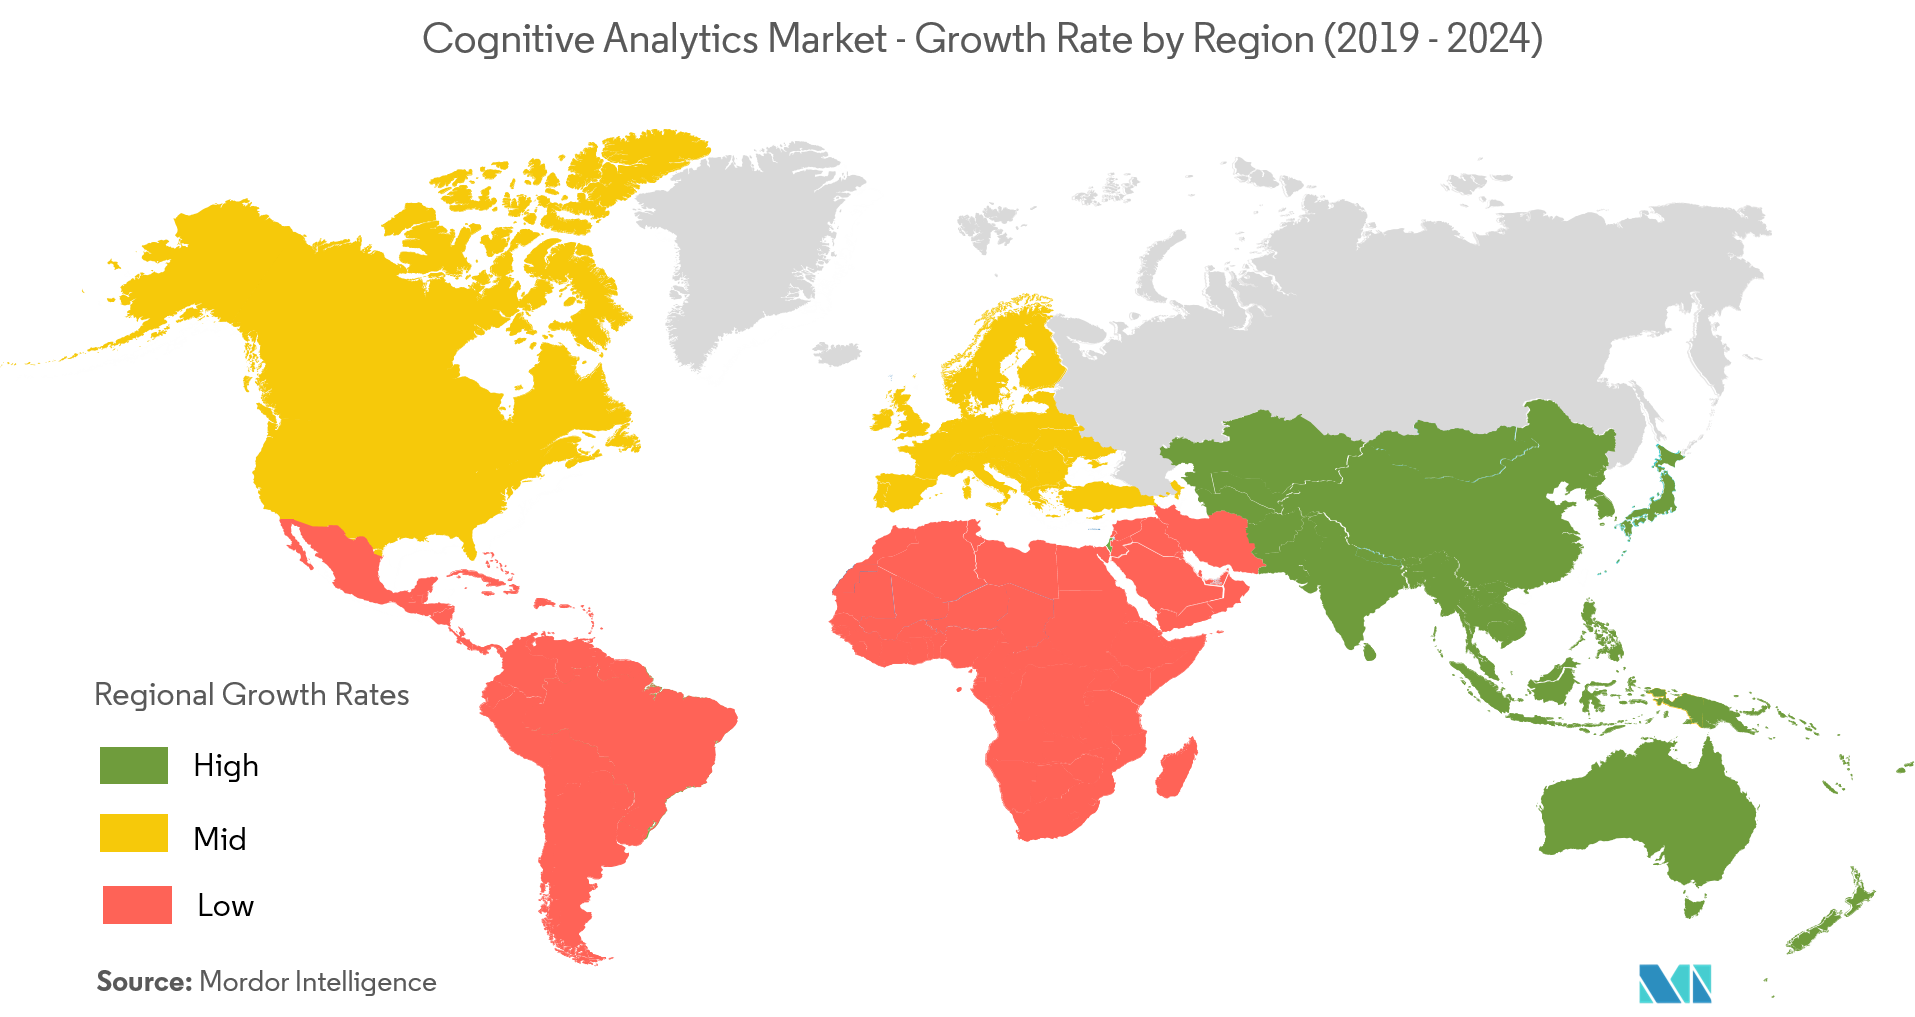 Cognitive Analytics Market - Growth Rate by Region (2019 - 2024)